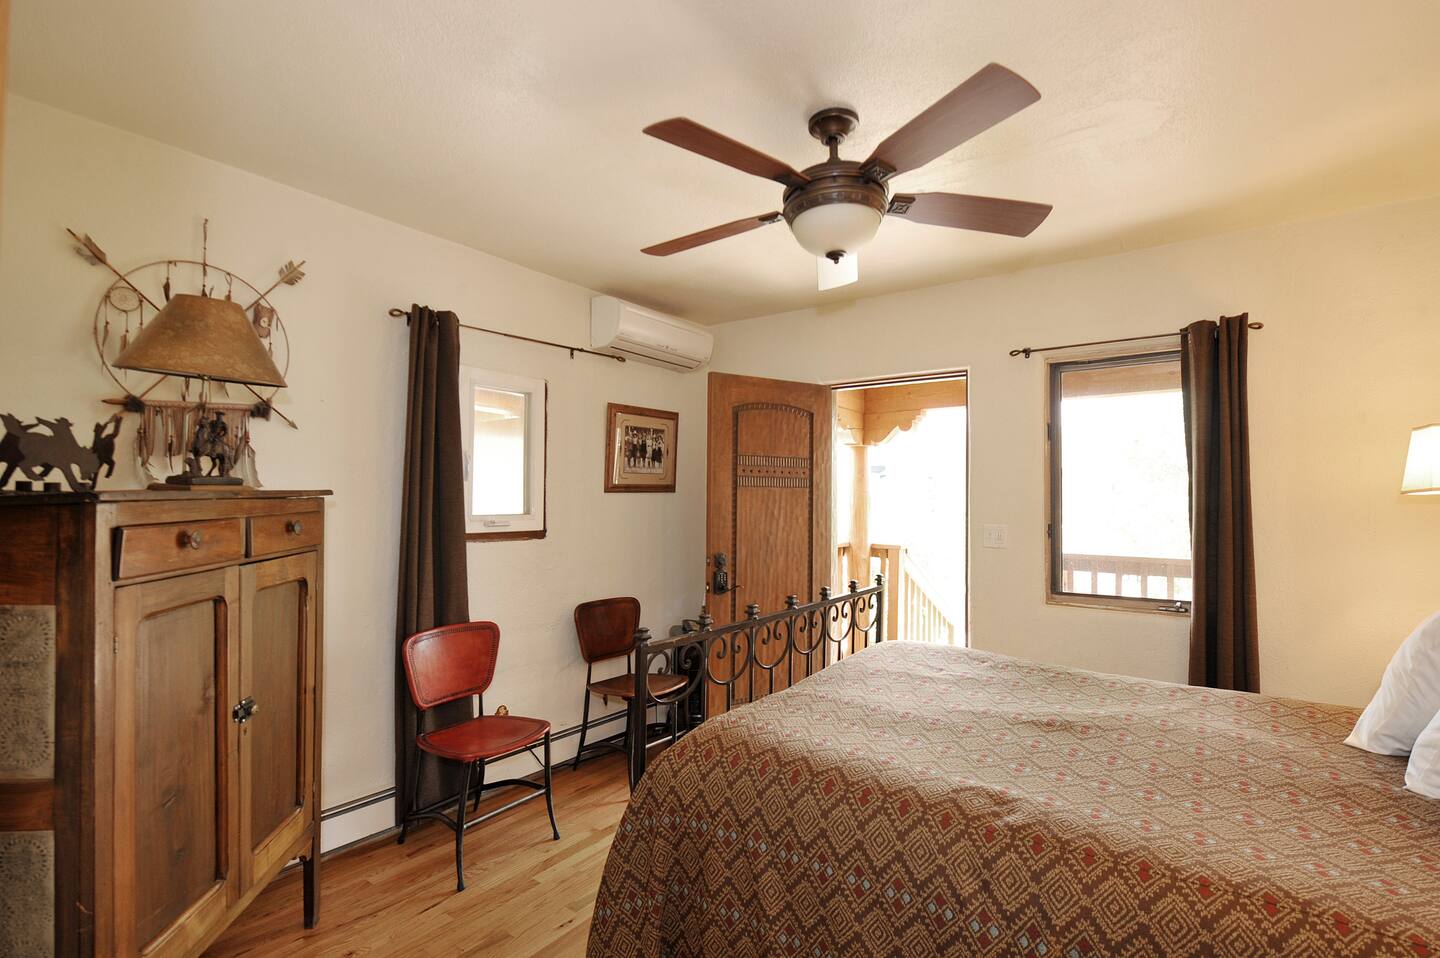 Cowgirl_Room_at_Casa_Cuma_Bed_and_Breakfast_Santa_Fe_Bed_and_Breakfast_20220624e